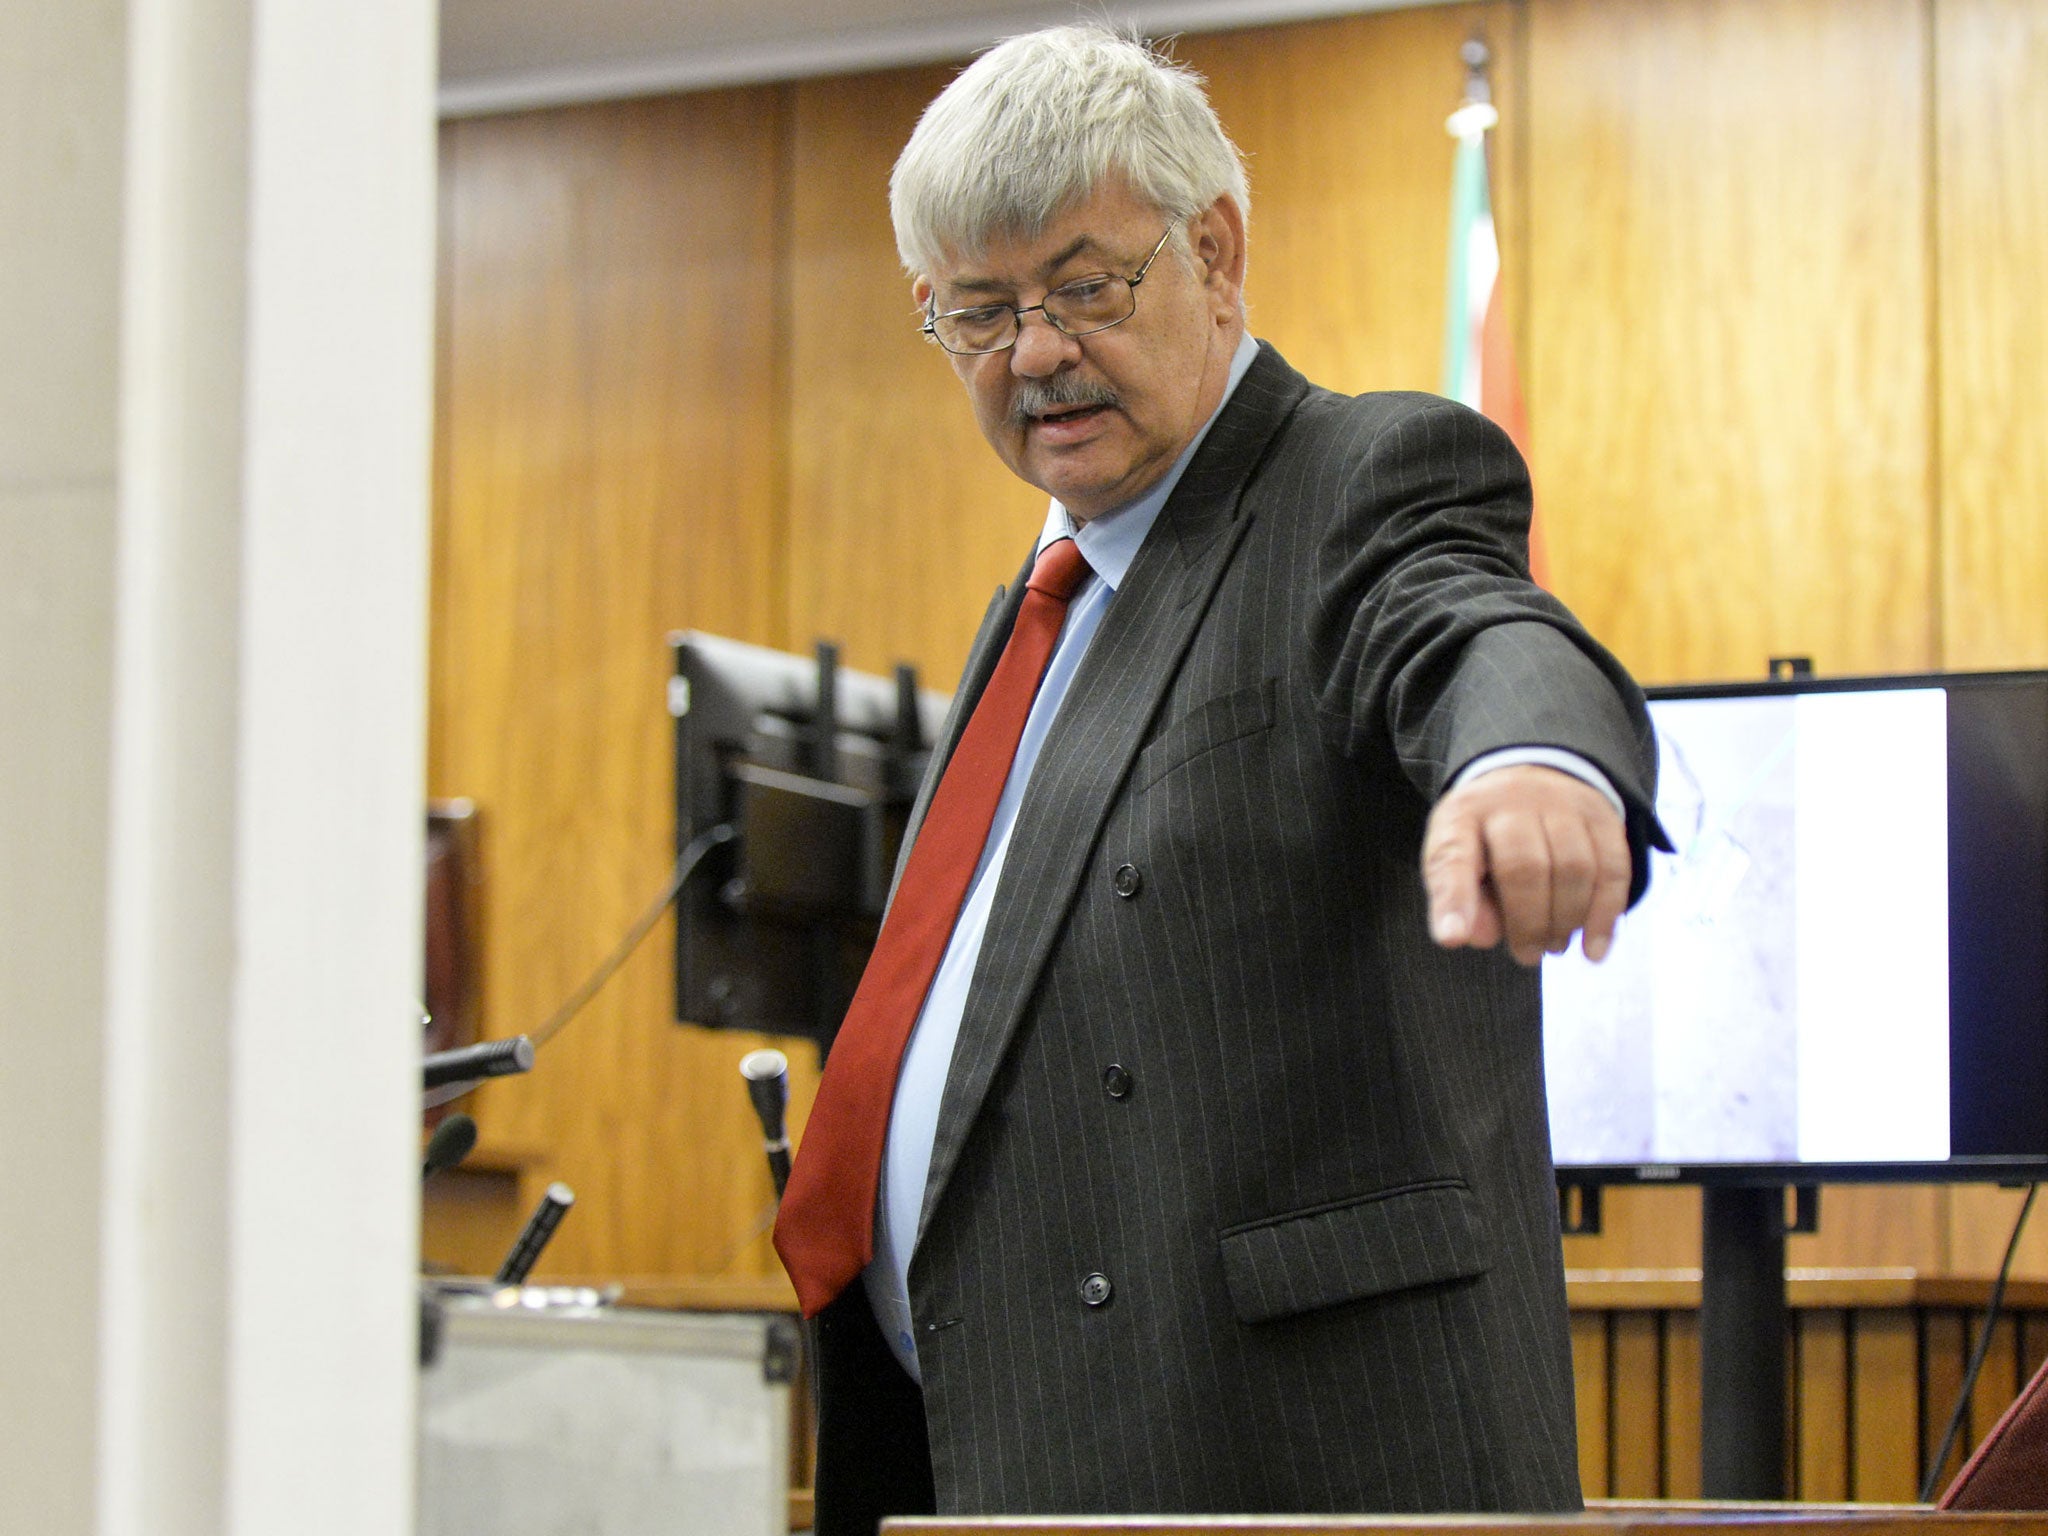 Wollie Wolmarans giving evidence in the Pretoria High Court on May 9, 2014 in Pretoria, South Africa